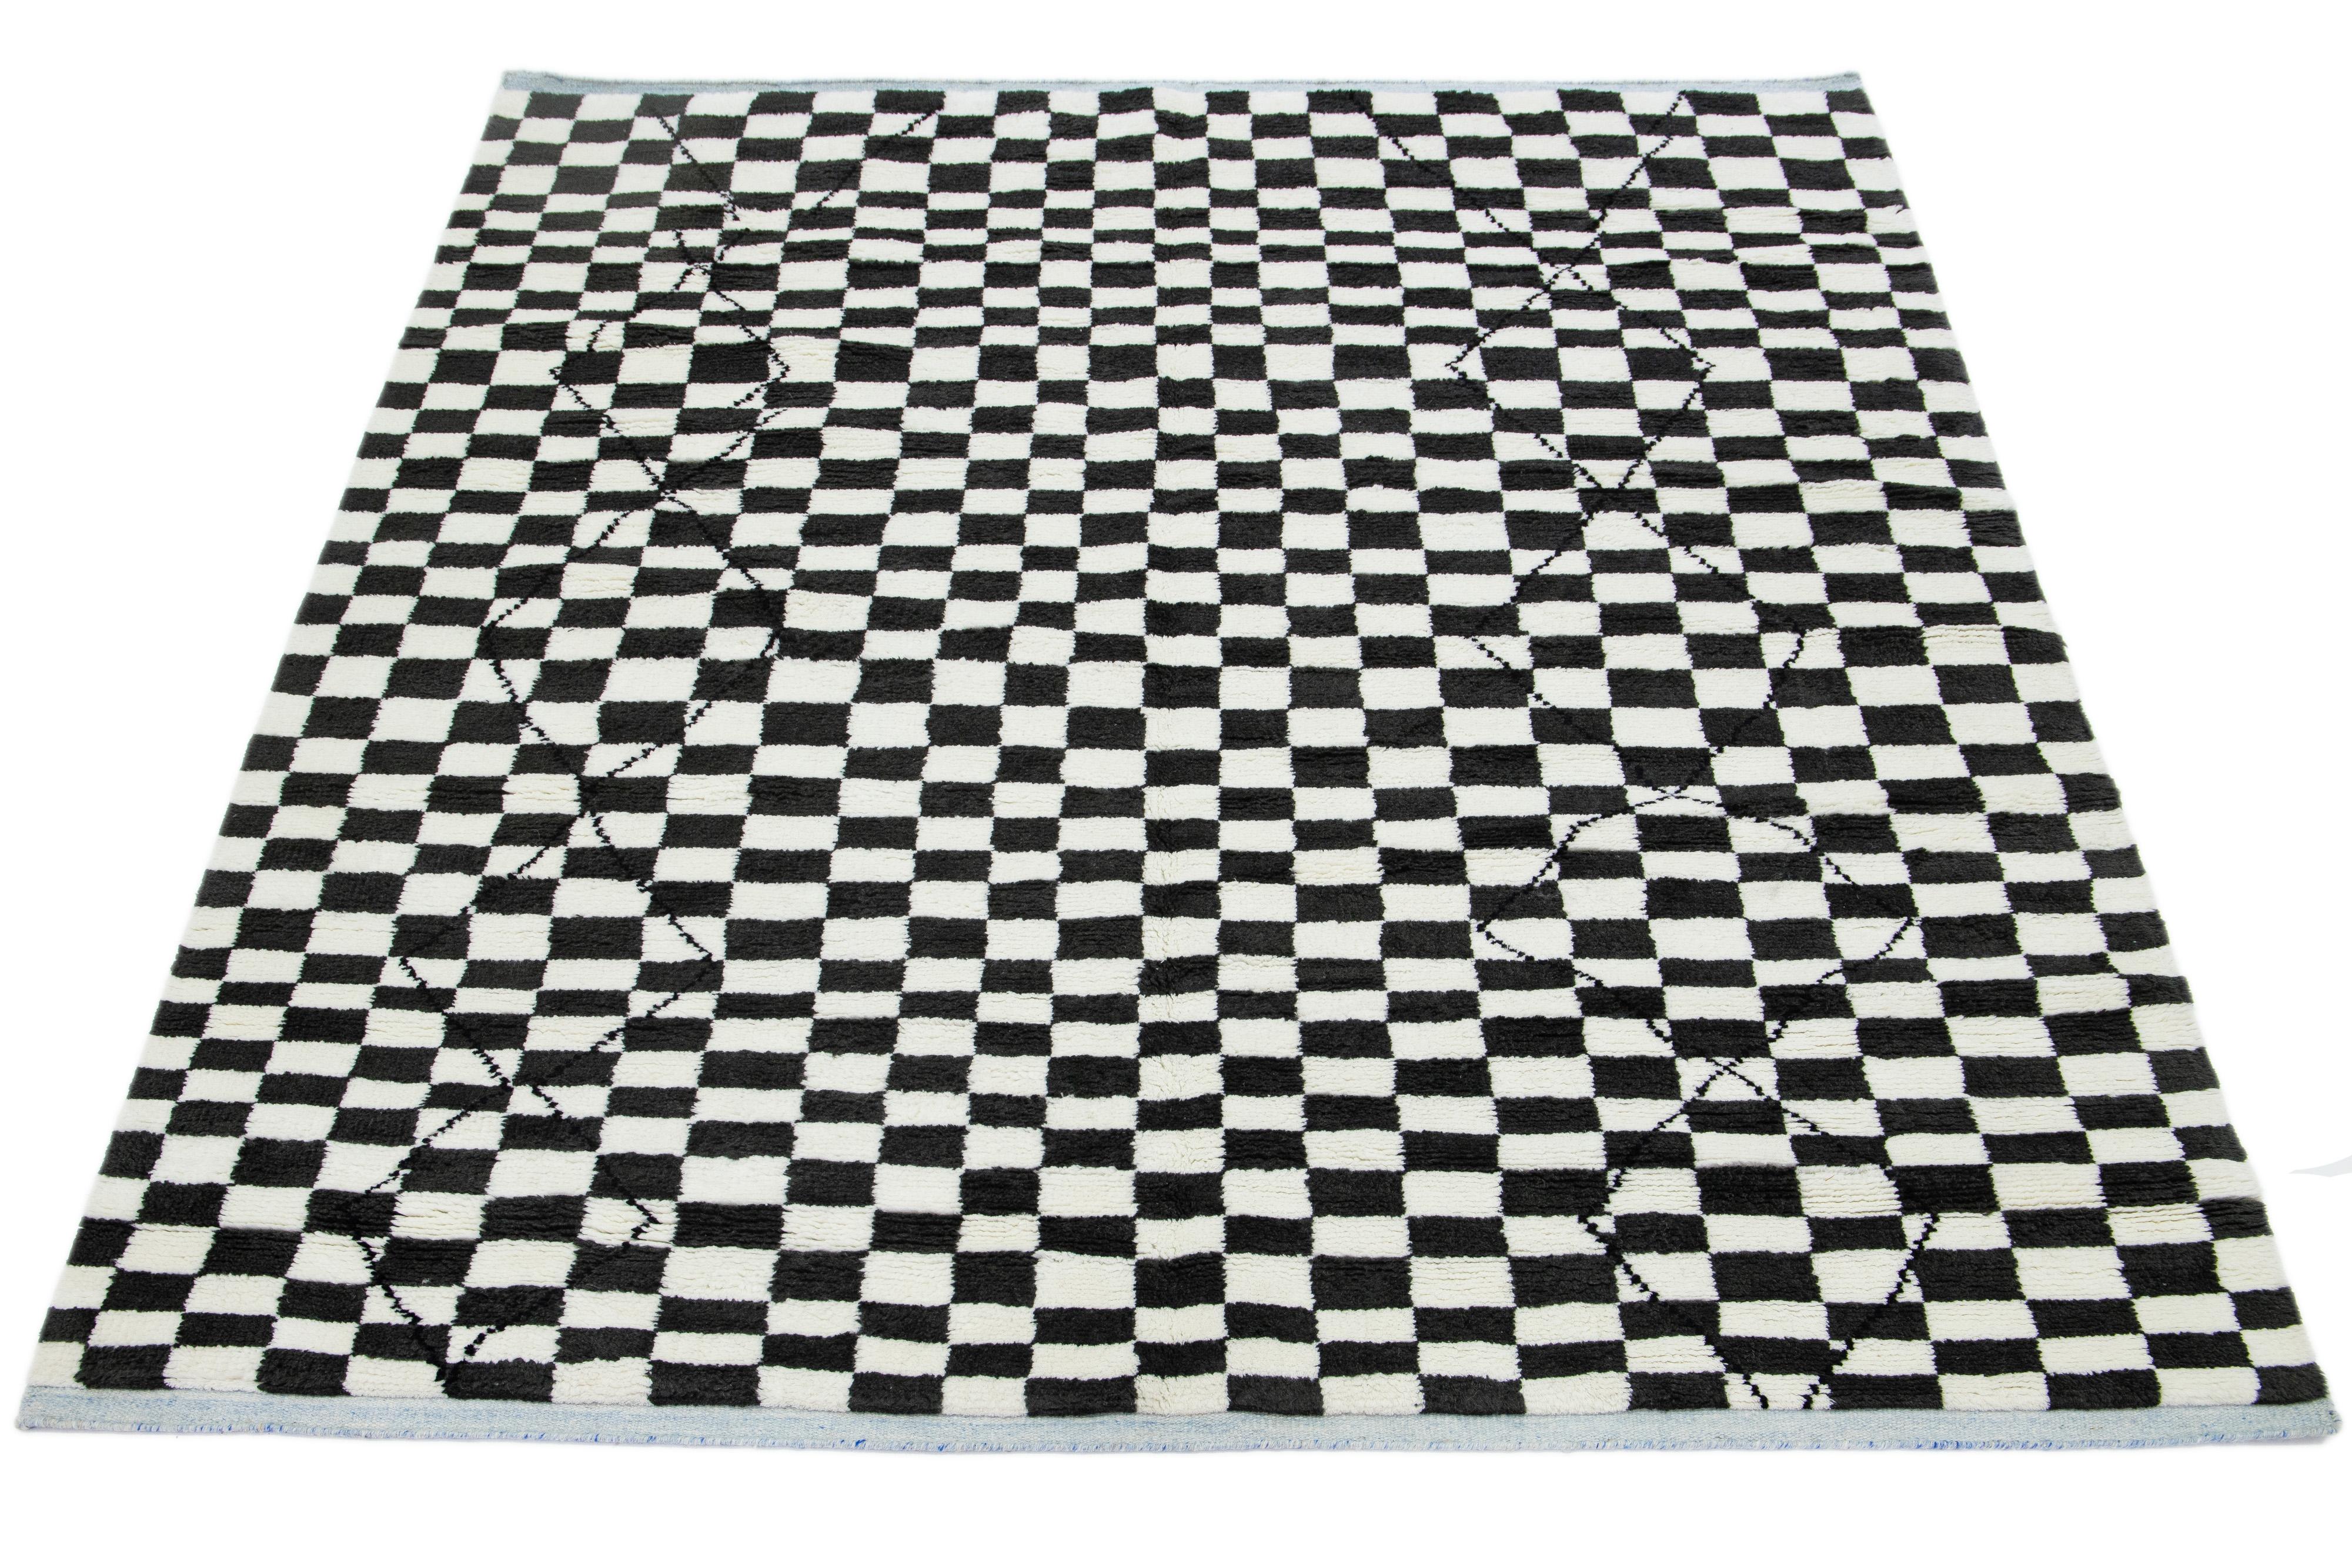 Apadana's Safi Collection features an incredibly stunning contemporary Moroccan-style design in this hand-knotted wool rug. With a striking color scheme of black and white, it displays a captivating checker pattern that truly impresses.

This rug